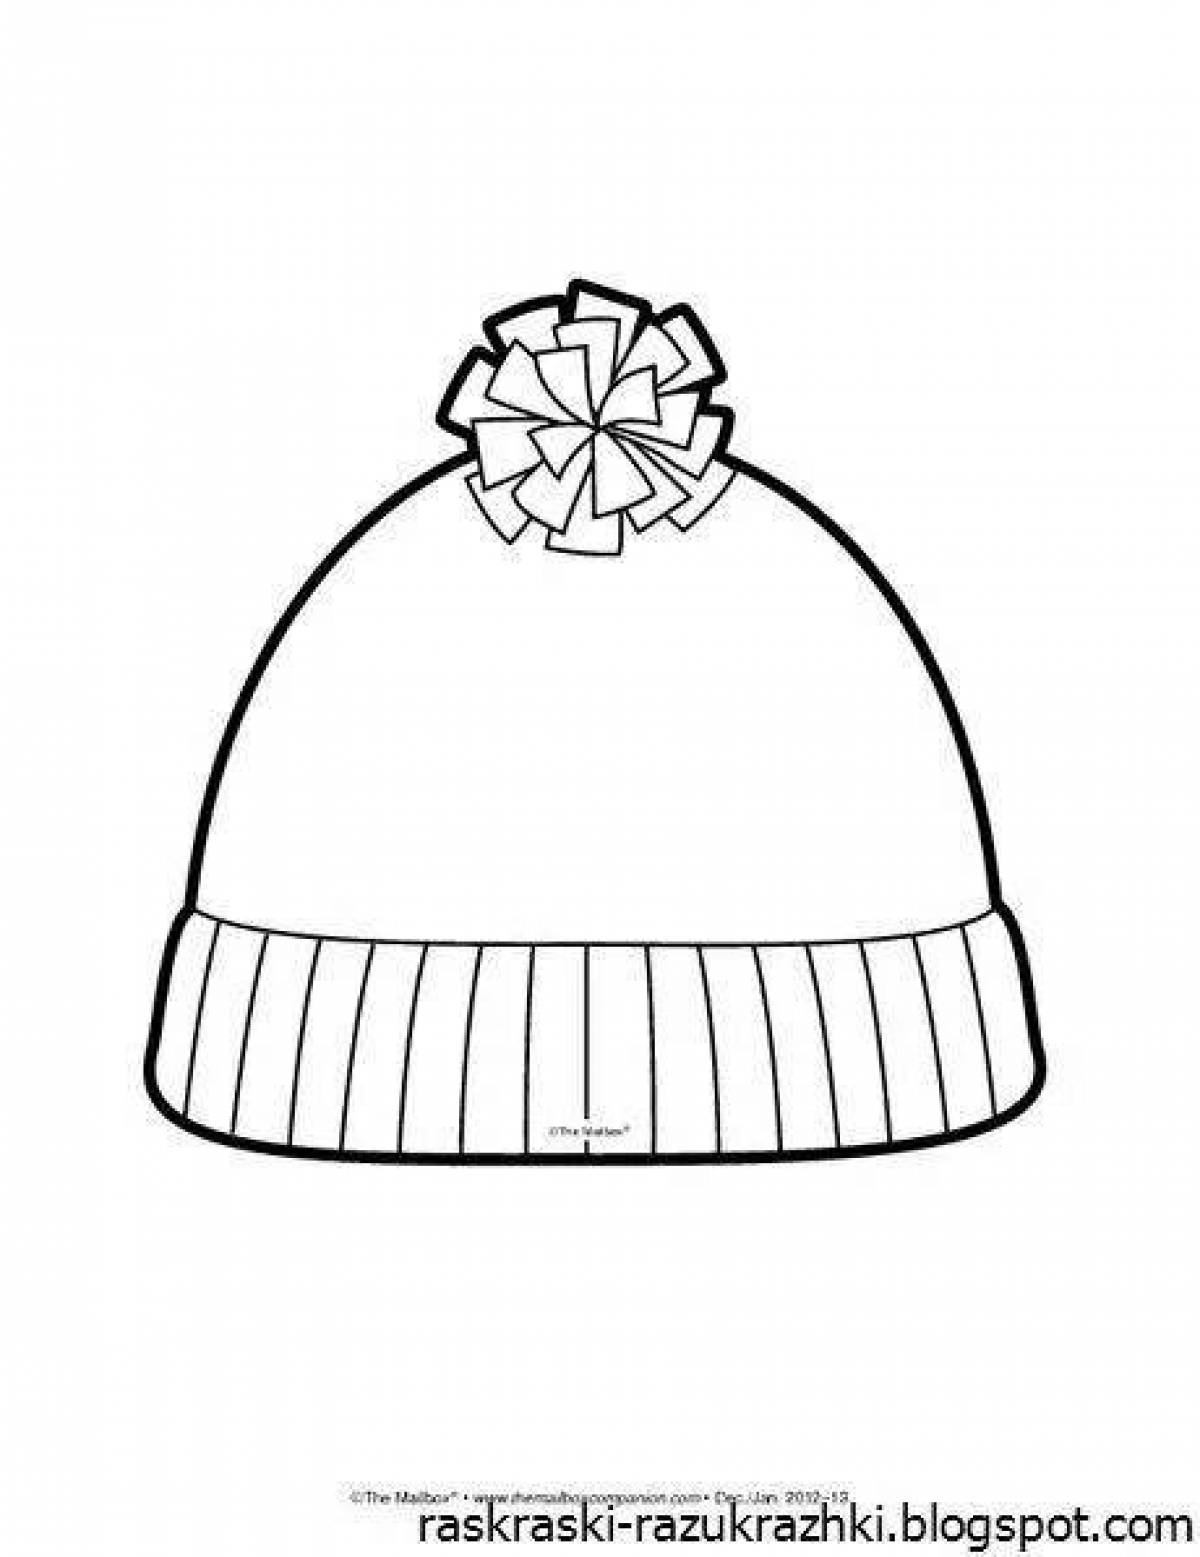 Playful winter hat coloring page for kids